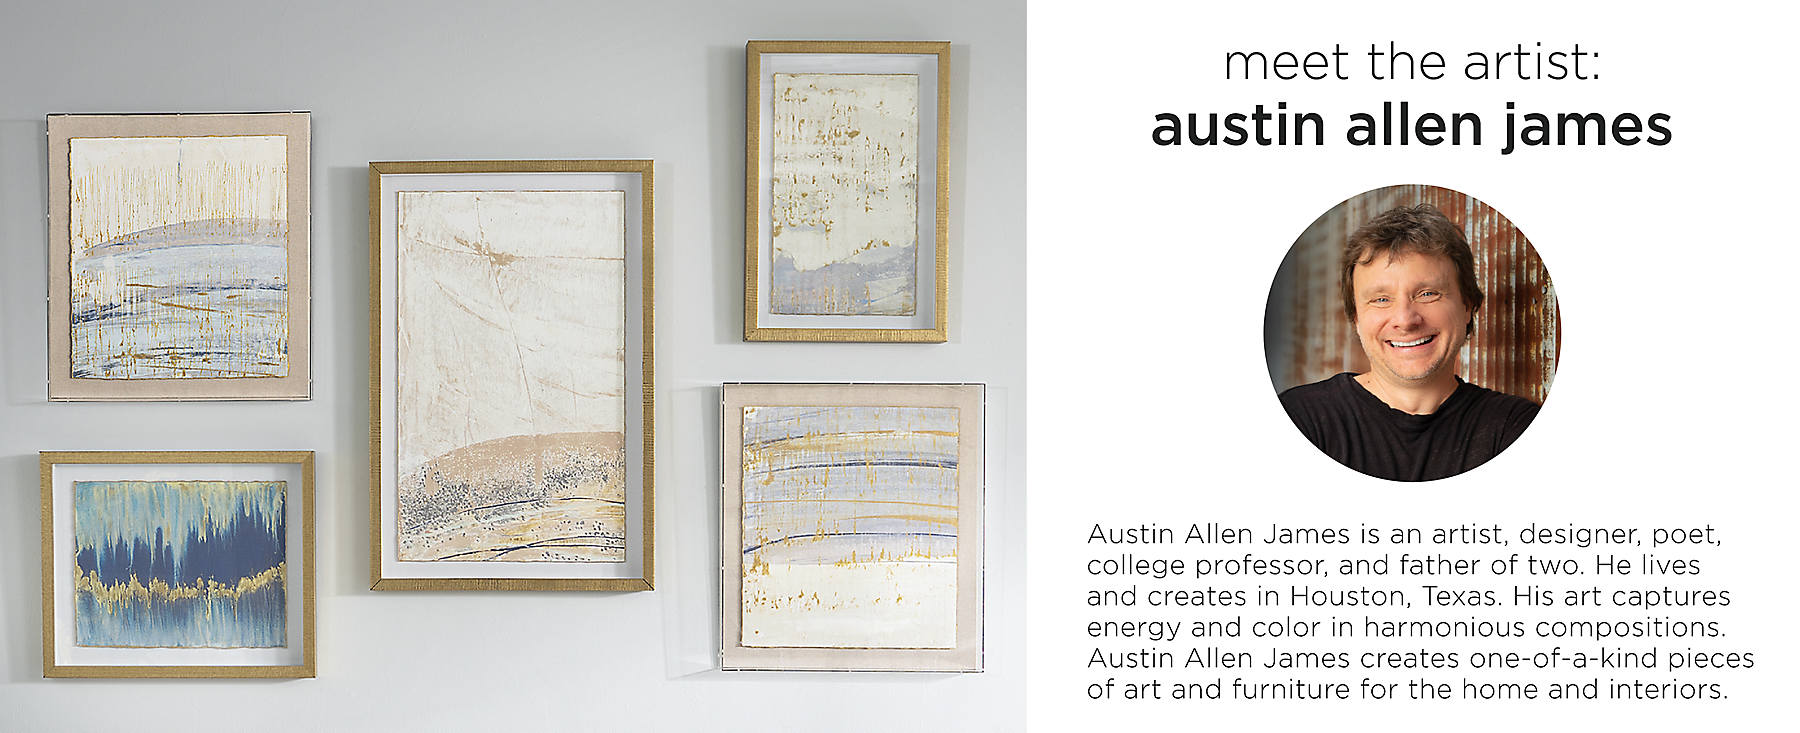 Meet the artist: Austin Allen James is an artist, designer, poet, college professor, and father of two. He lives in Houston, TX. His art captures energy and color in harmonious compositions. Austin Allen James creates one-of-a-kind pieces of art and furniture for the home and interiors.